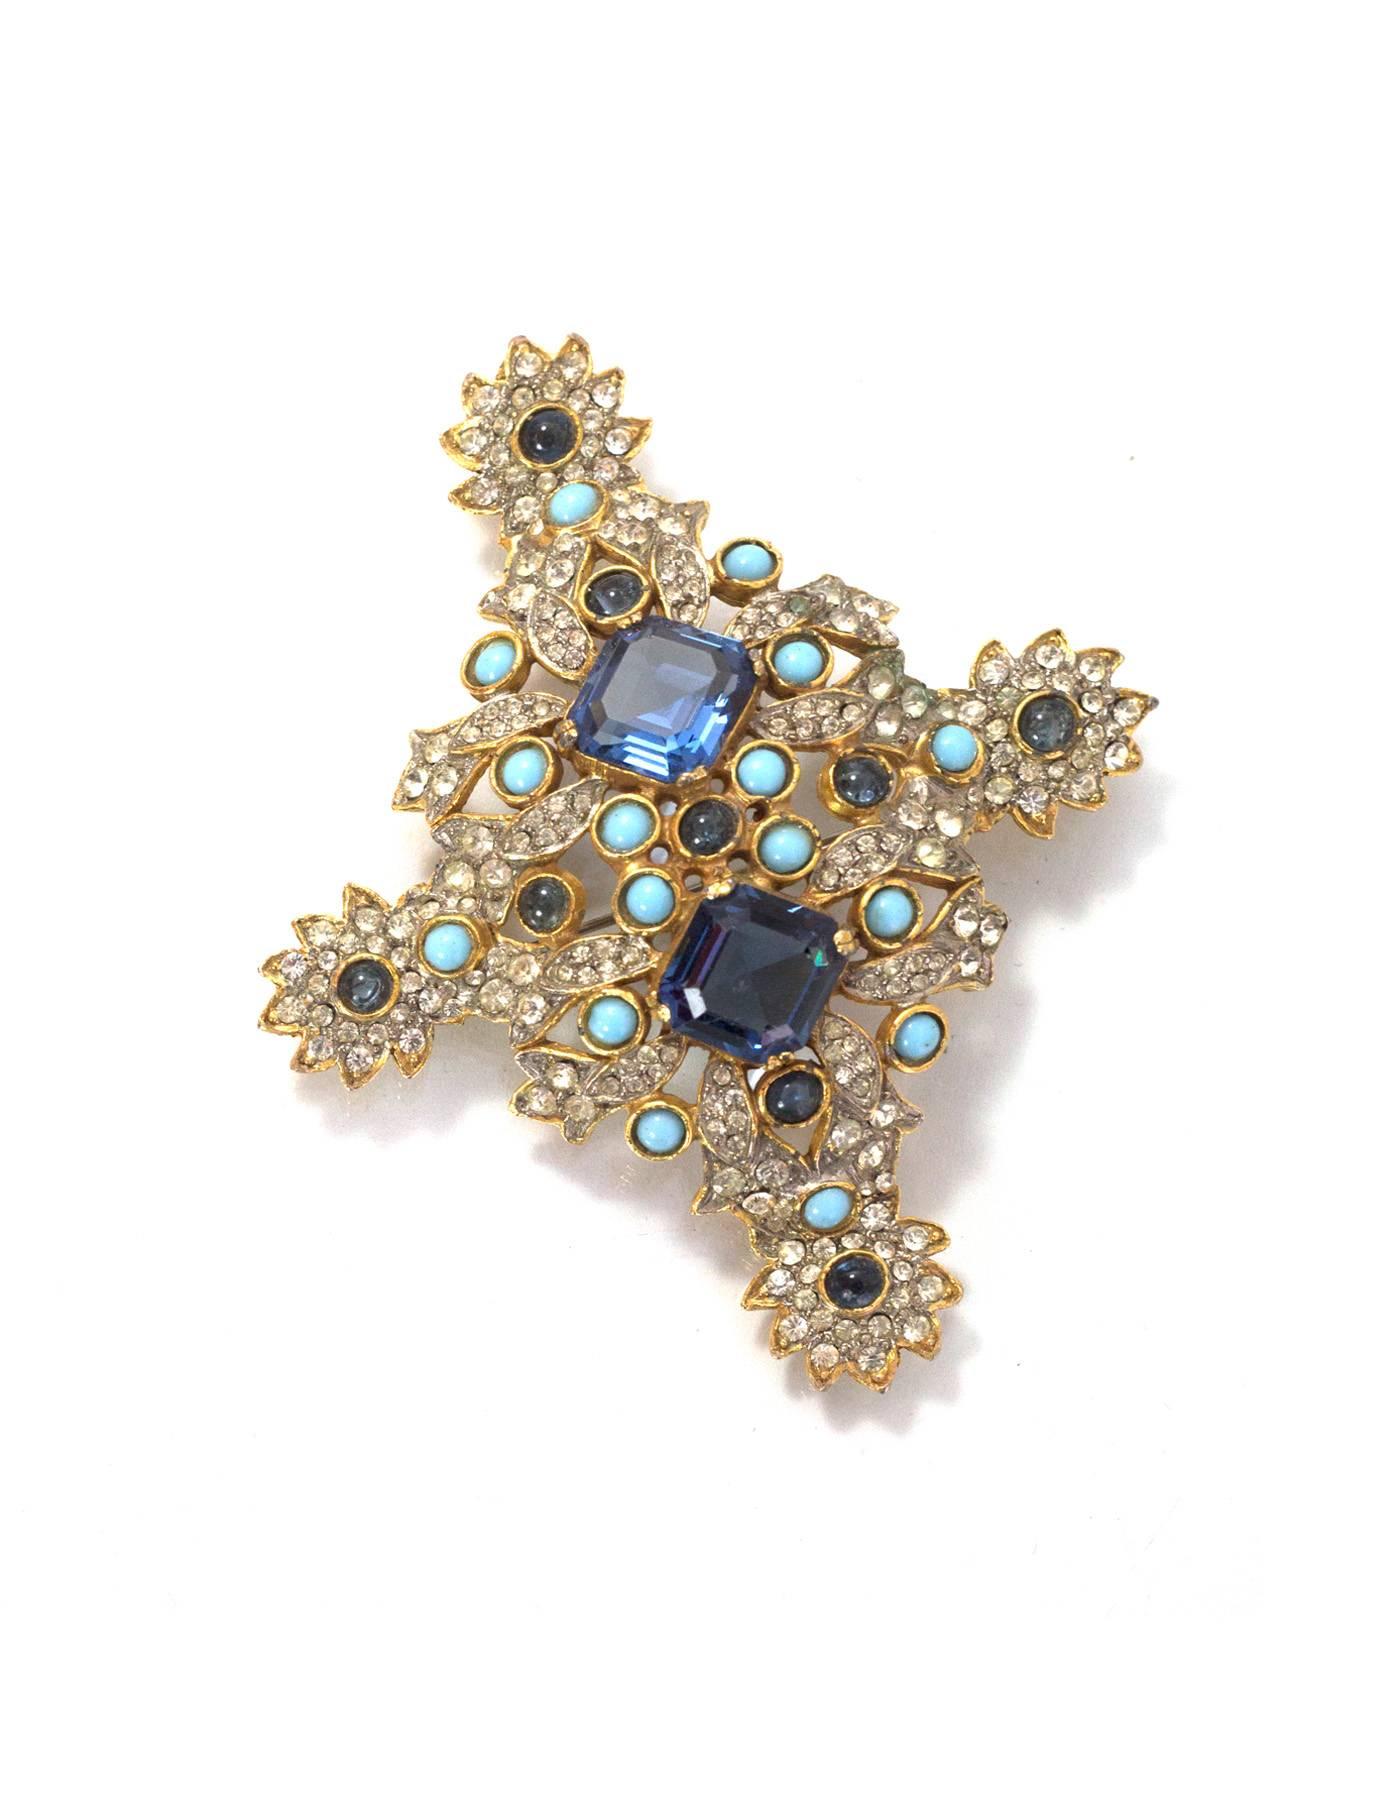 Kenneth Jay Lane Blue & Gold Crystal Brooch
Features hook on back for wearing as a pendant on necklace

Color: Dark blue, light blue, clear and goldtone
Materials: Crystals, stone and metal
Closure/Opening: Pin back closure
Stamp: KJL
Overall